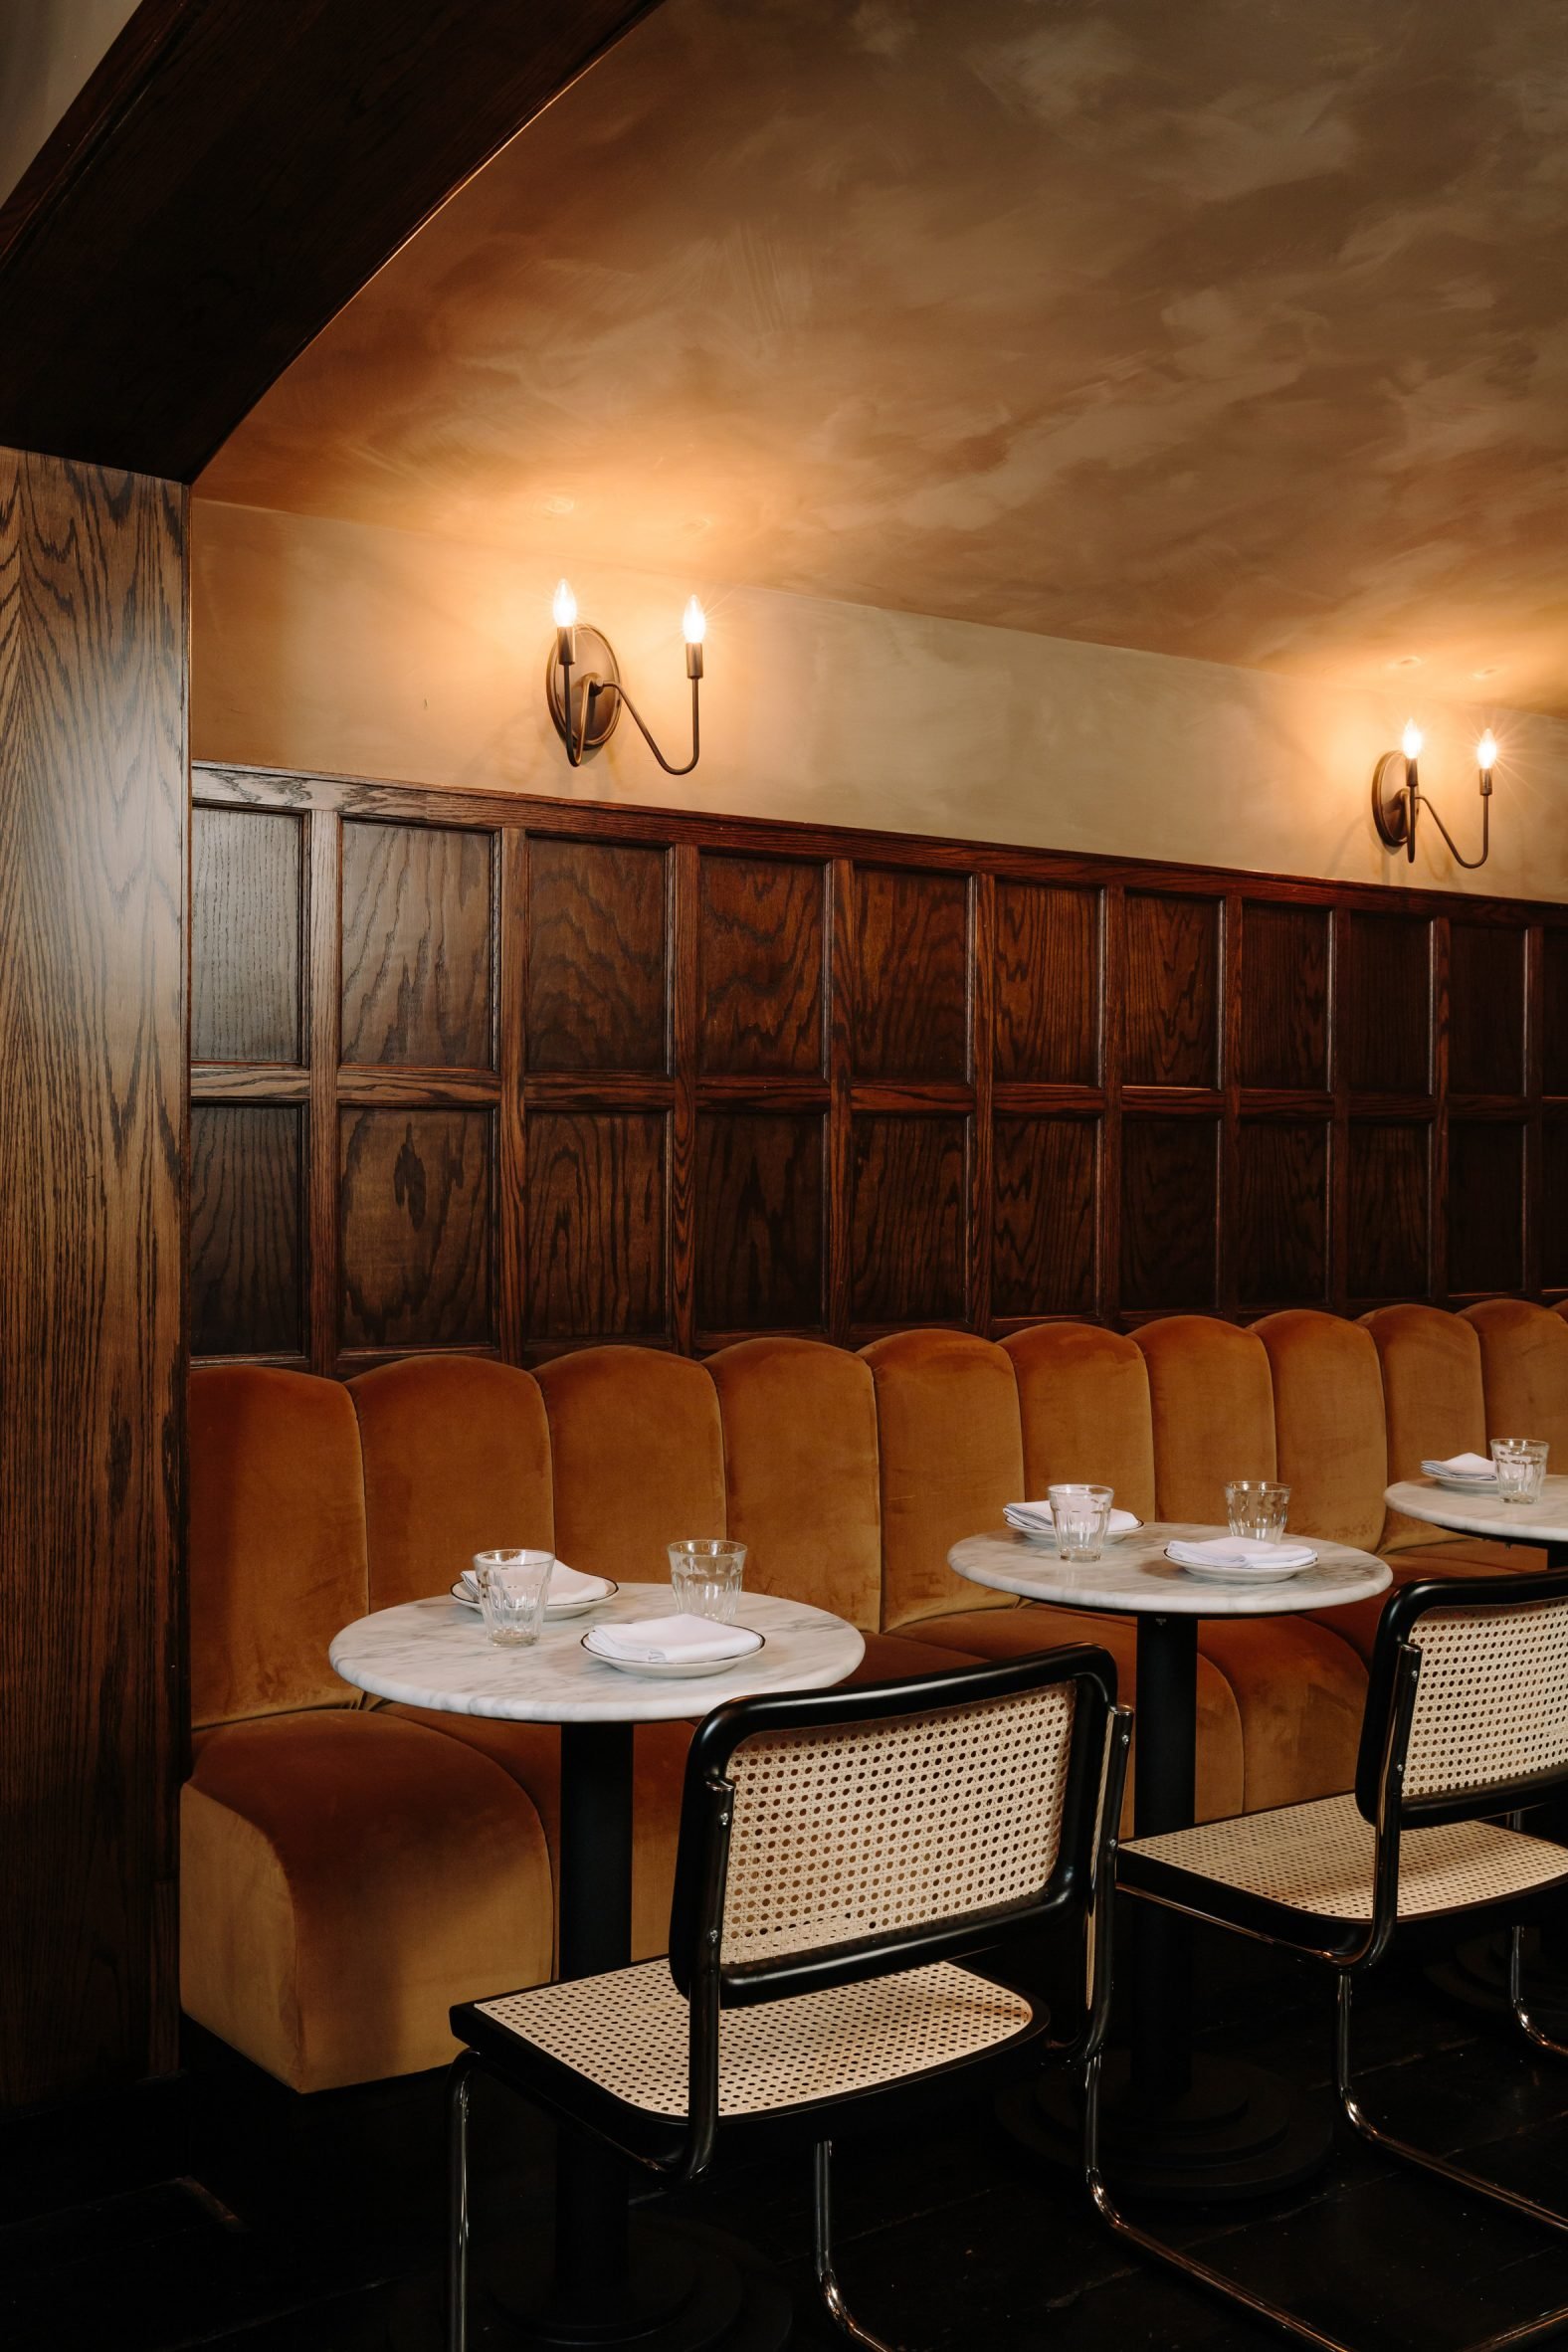 Banquette below walnut panelling and candle sconces